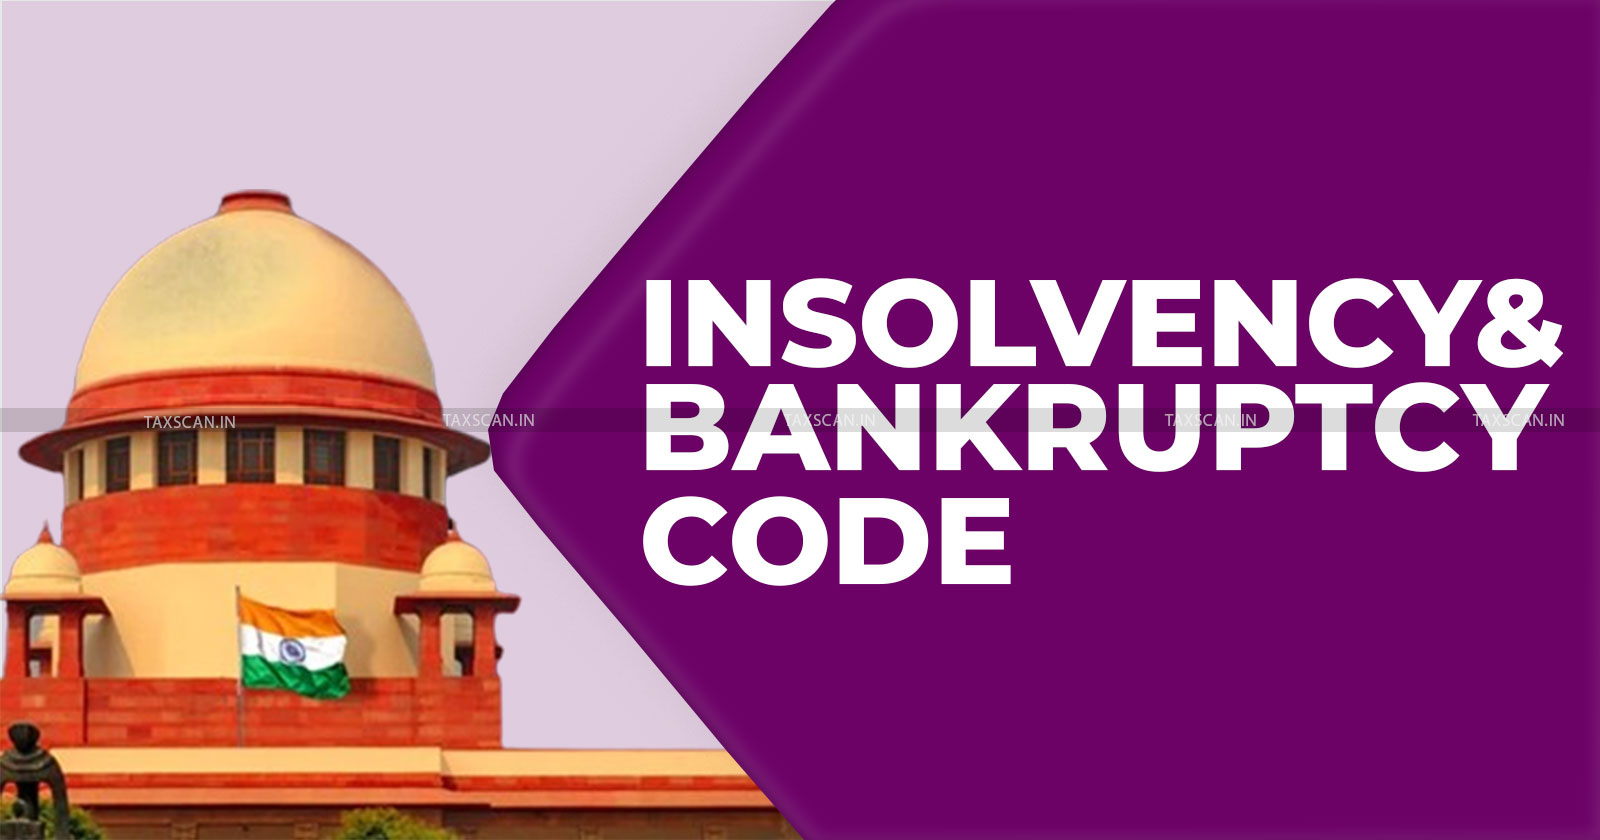 142 Days Delay - Filing Appeal - Condonable - Insolvency Bankruptcy Code - Supreme Court - Petition - taxscan